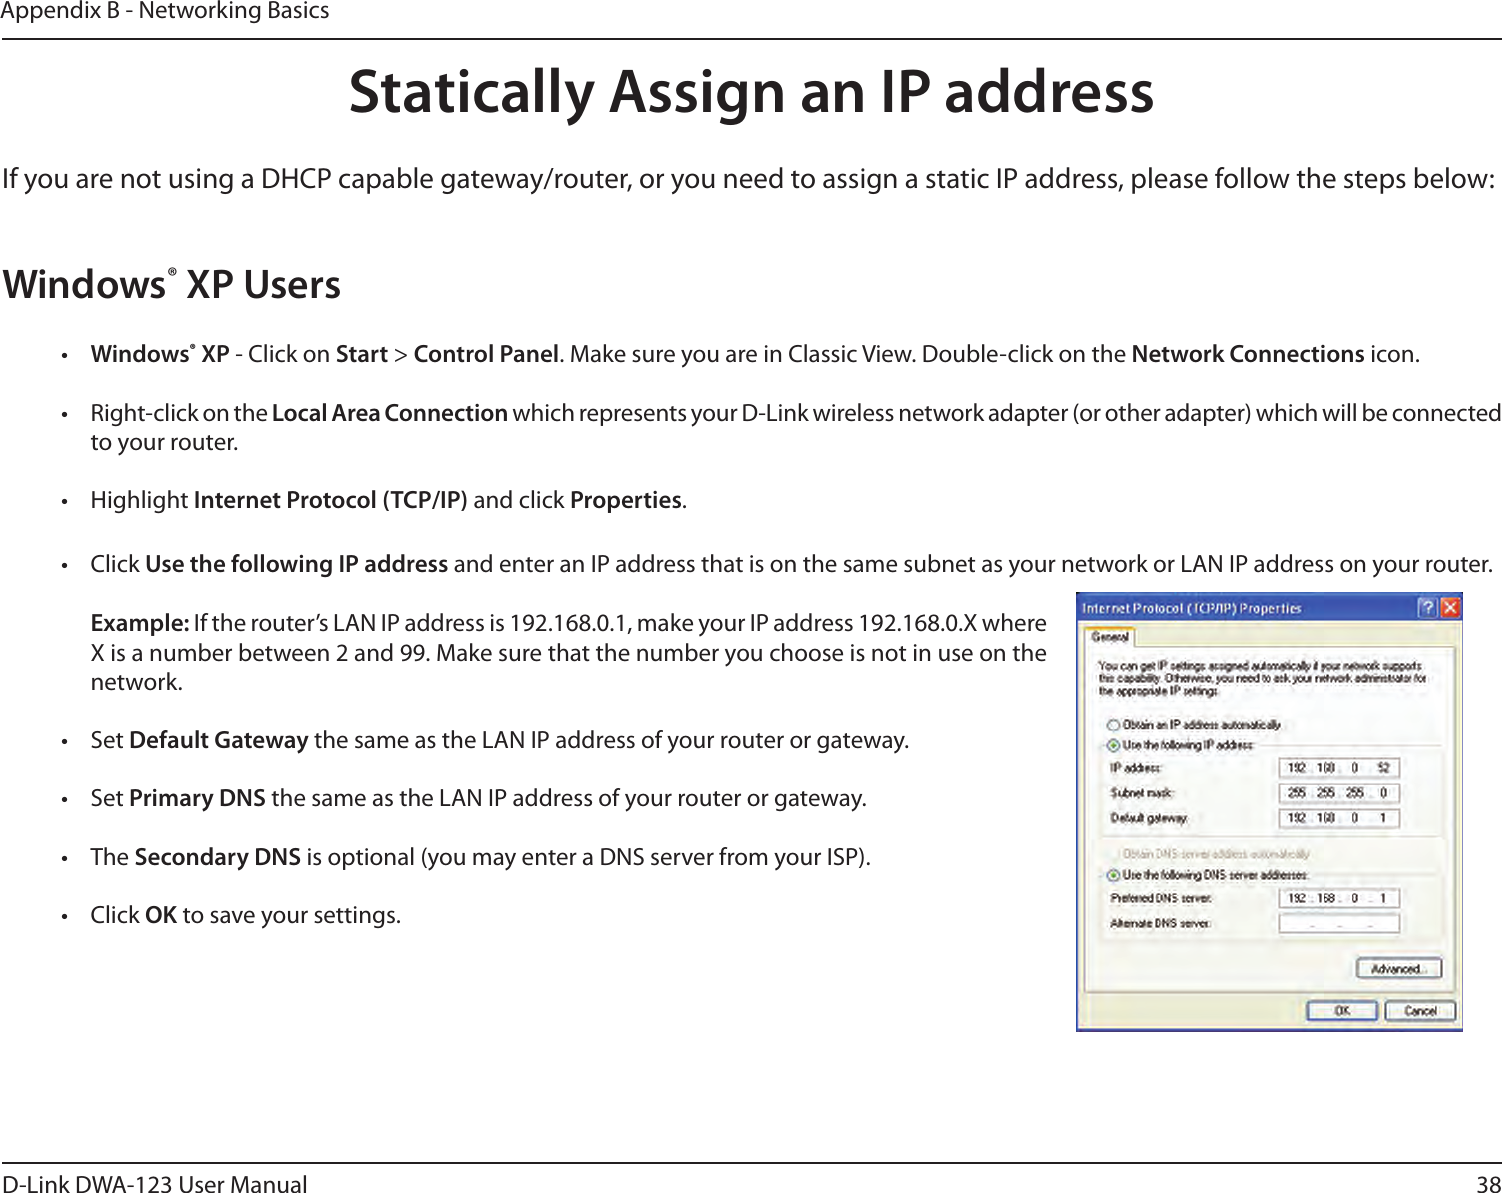 38D-Link DWA-123 User ManualAppendix B - Networking BasicsStatically Assign an IP addressIf you are not using a DHCP capable gateway/router, or you need to assign a static IP address, please follow the steps below:Windows® XP Users•  Windows® XP - Click on Start &gt; Control Panel. Make sure you are in Classic View. Double-click on the Network Connections icon.•  Right-click on the Local Area Connection which represents your D-Link wireless network adapter (or other adapter) which will be connected to your router.•  Highlight Internet Protocol (TCP/IP) and click Properties.•  Click Use the following IP address and enter an IP address that is on the same subnet as your network or LAN IP address on your router. Example: If the router’s LAN IP address is 192.168.0.1, make your IP address 192.168.0.X where X is a number between 2 and 99. Make sure that the number you choose is not in use on the network. •  Set Default Gateway the same as the LAN IP address of your router or gateway.•  Set Primary DNS the same as the LAN IP address of your router or gateway. •  The Secondary DNS is optional (you may enter a DNS server from your ISP).•  Click OK to save your settings.